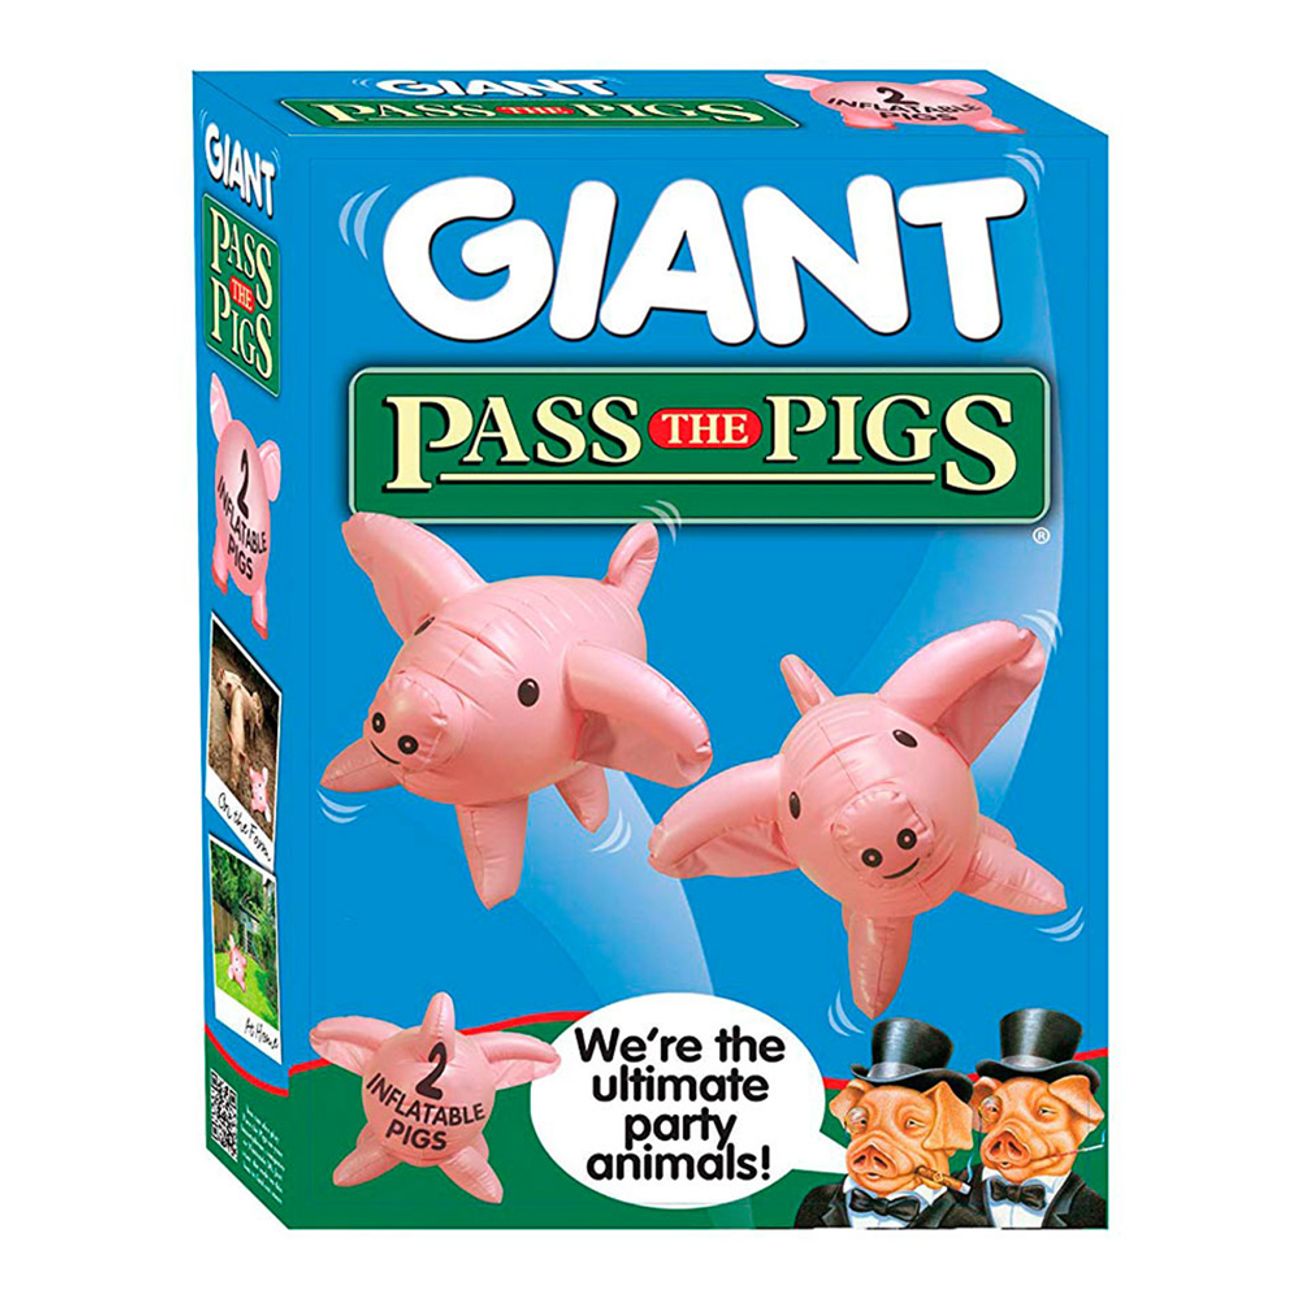 Pass The Pigs - Giant Inflatable Pigs (EN) (WIN1919)